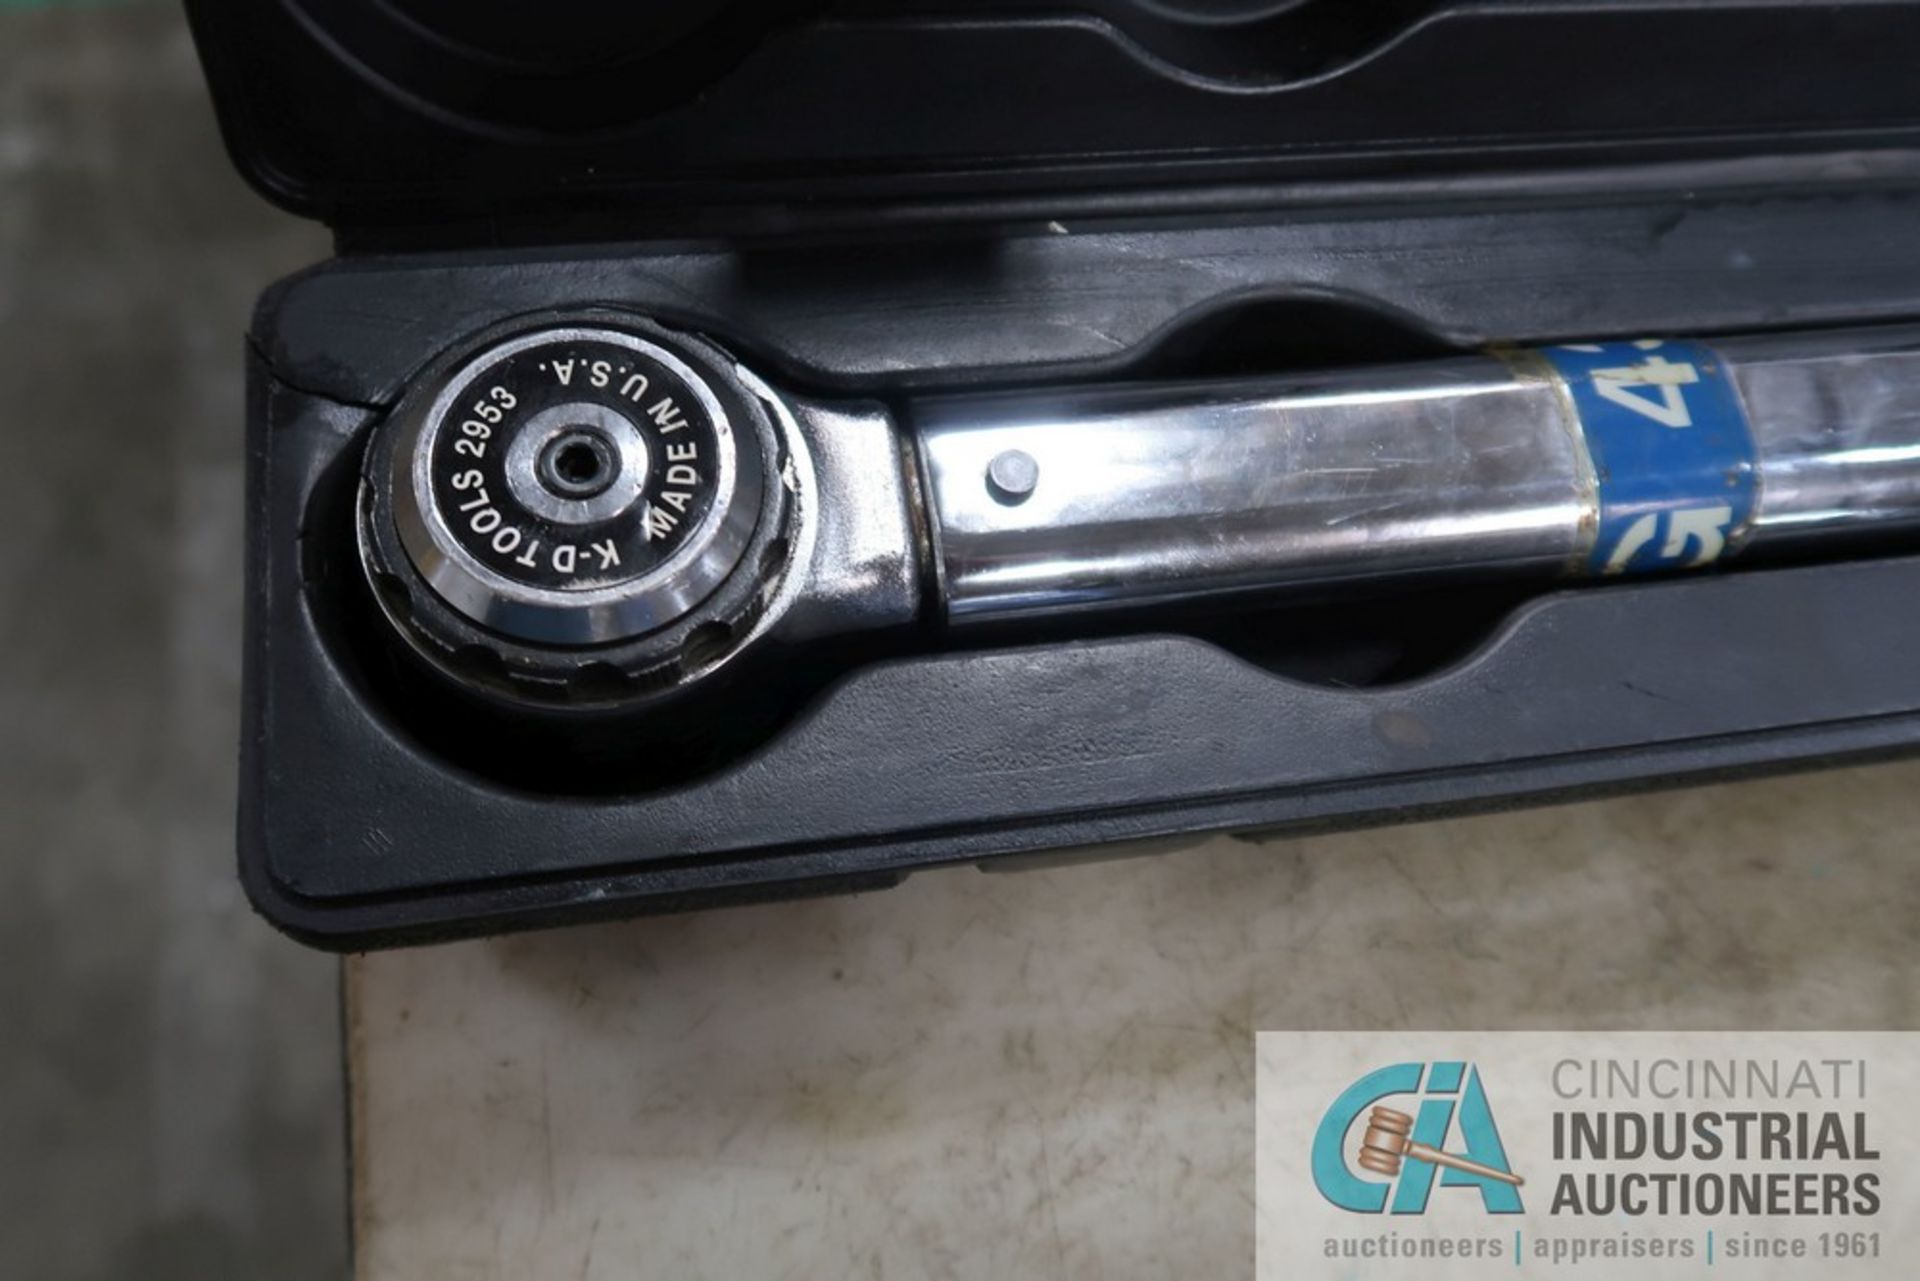 100-600 FT/LB K-D TOOLS 1" DRIVE TORQUE WRENCH - Image 2 of 2